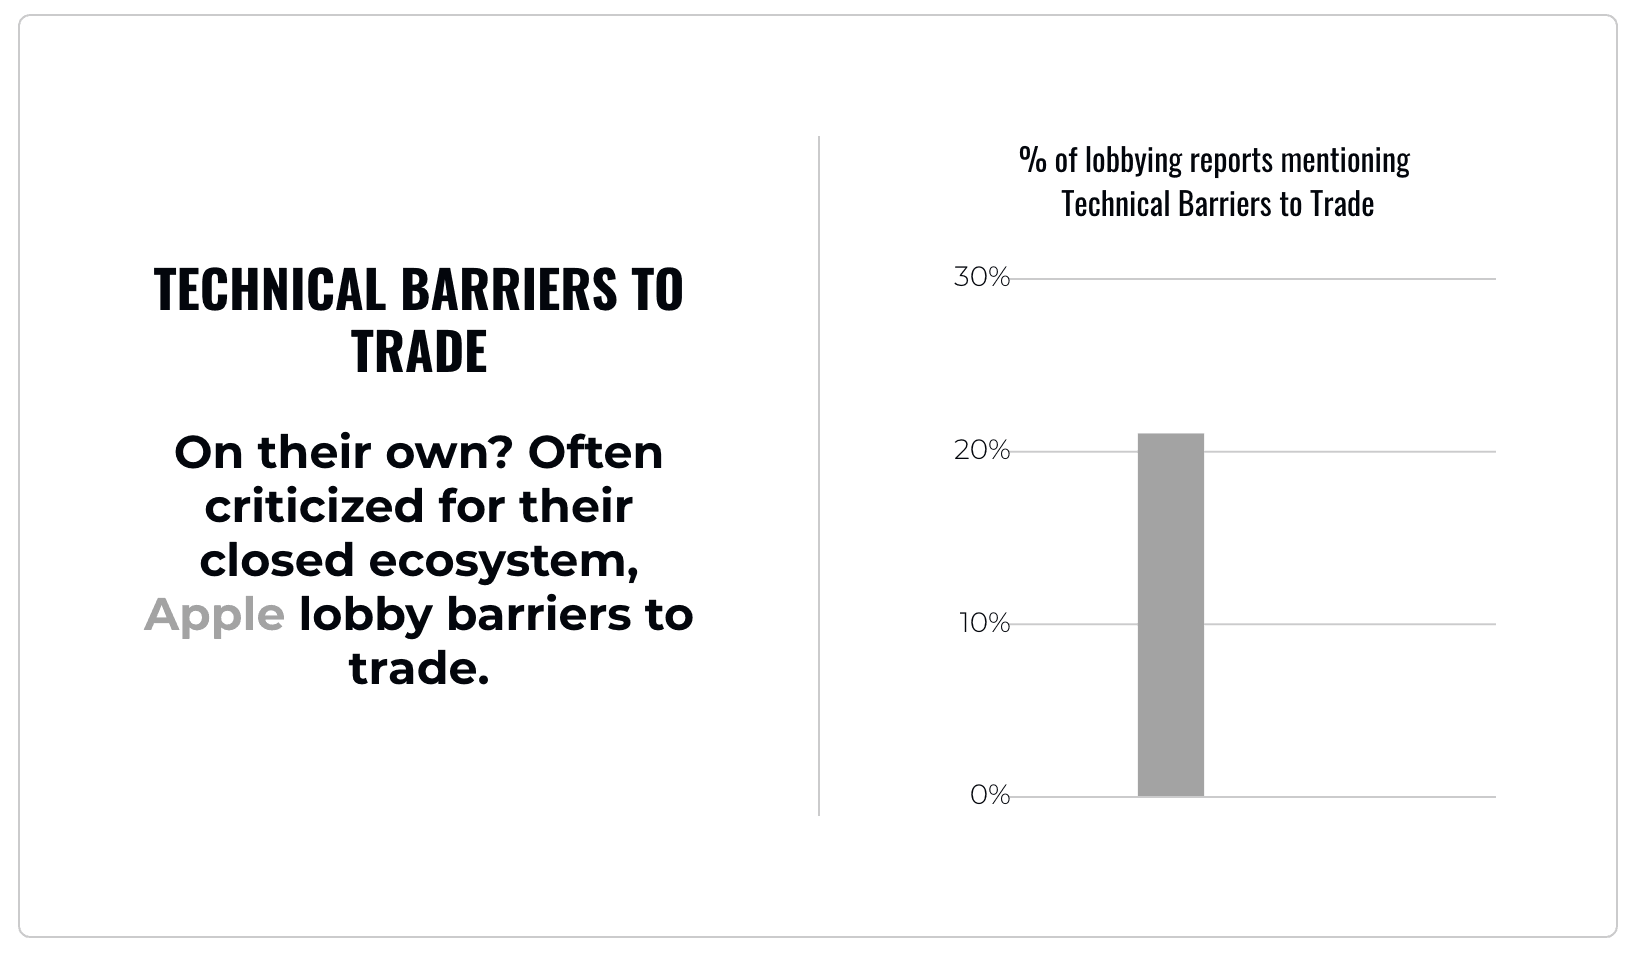 Technical barriers to trade